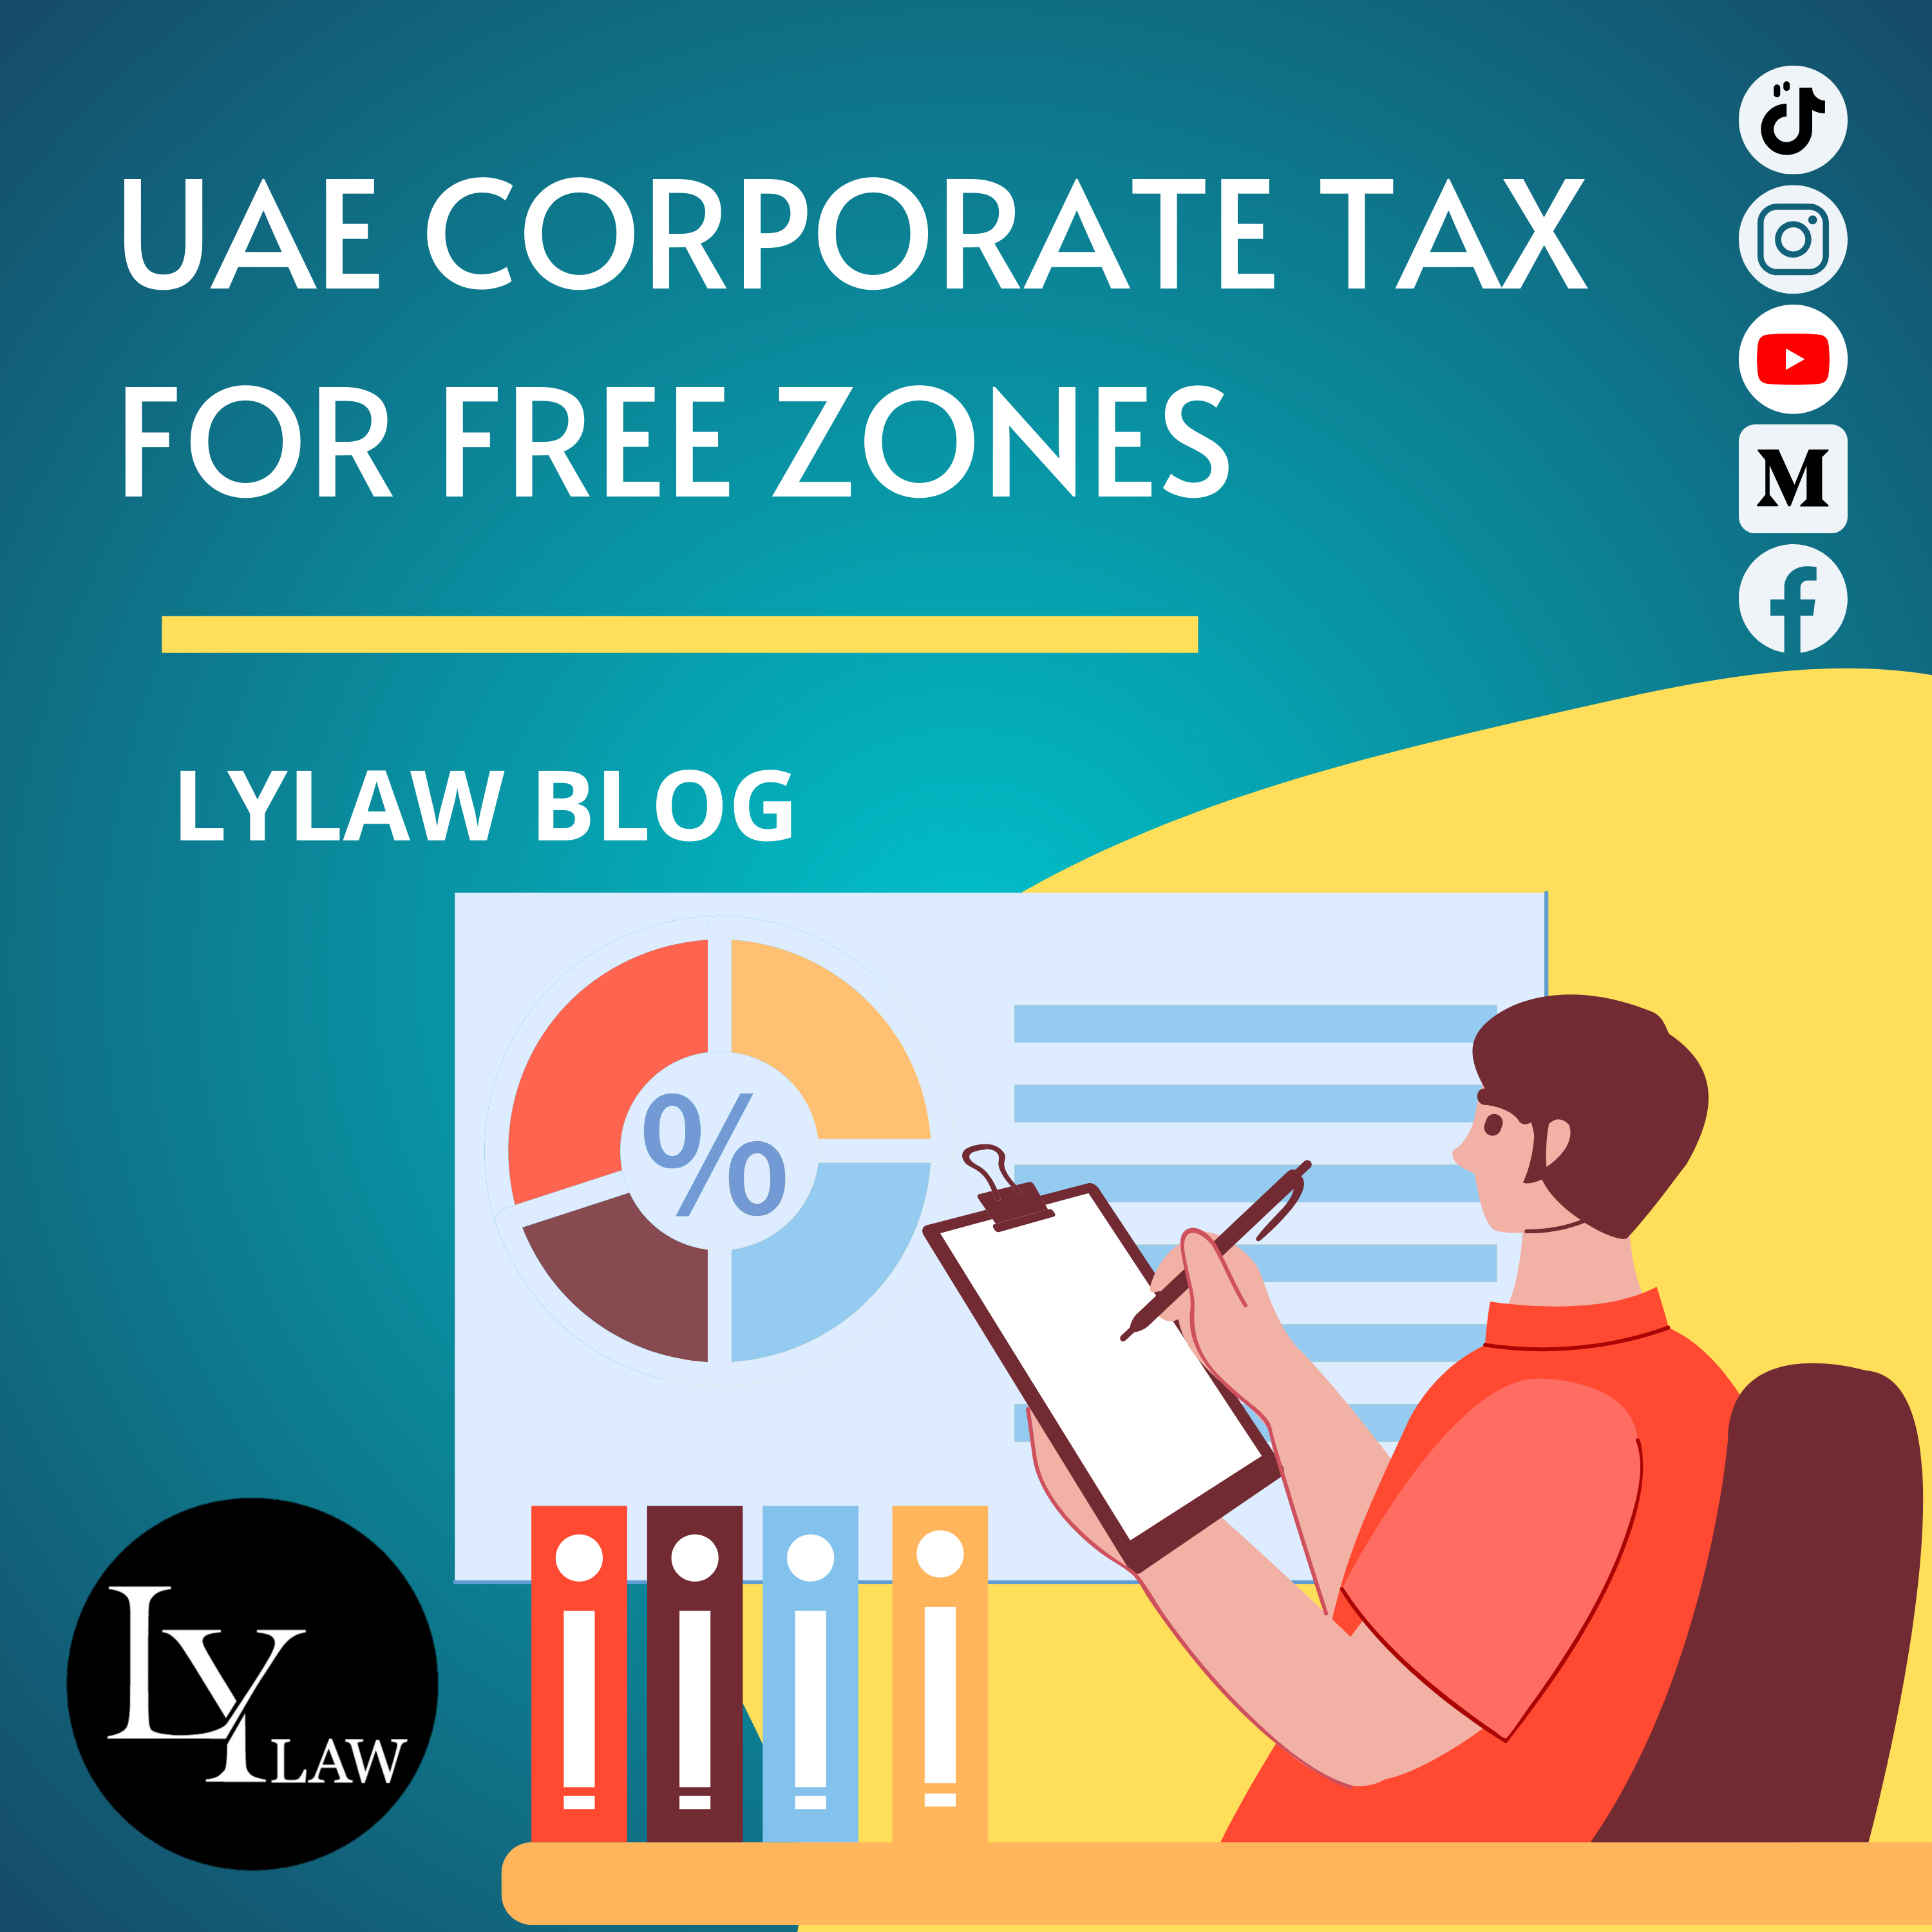 UAE Corporate Tax for Free Zones